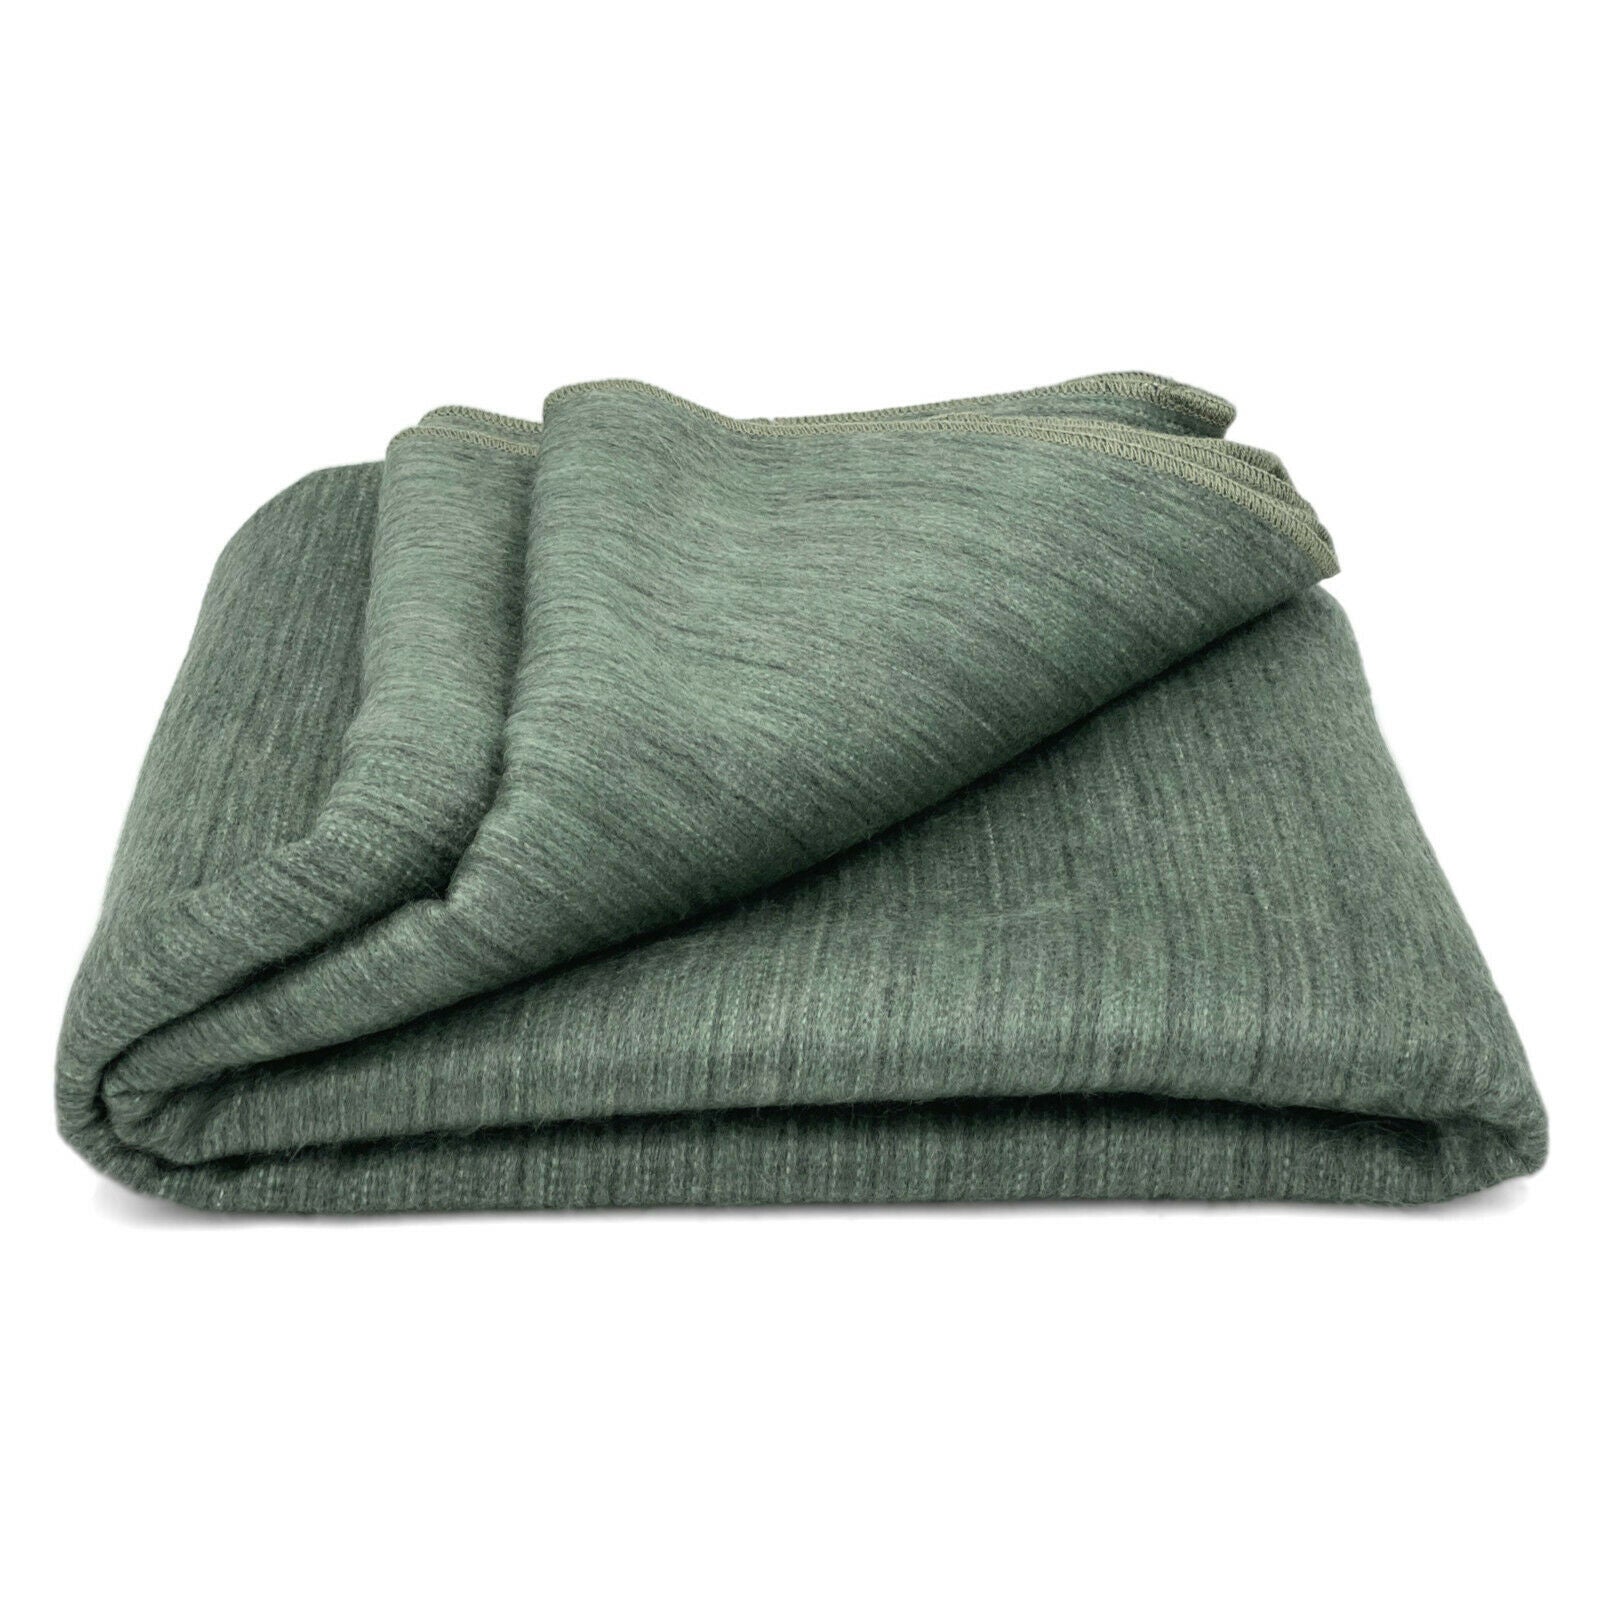 Pituca - Baby Alpaca Wool Throw Blanket / Sofa Cover - Queen 93" x 67" - solid green mica pattern